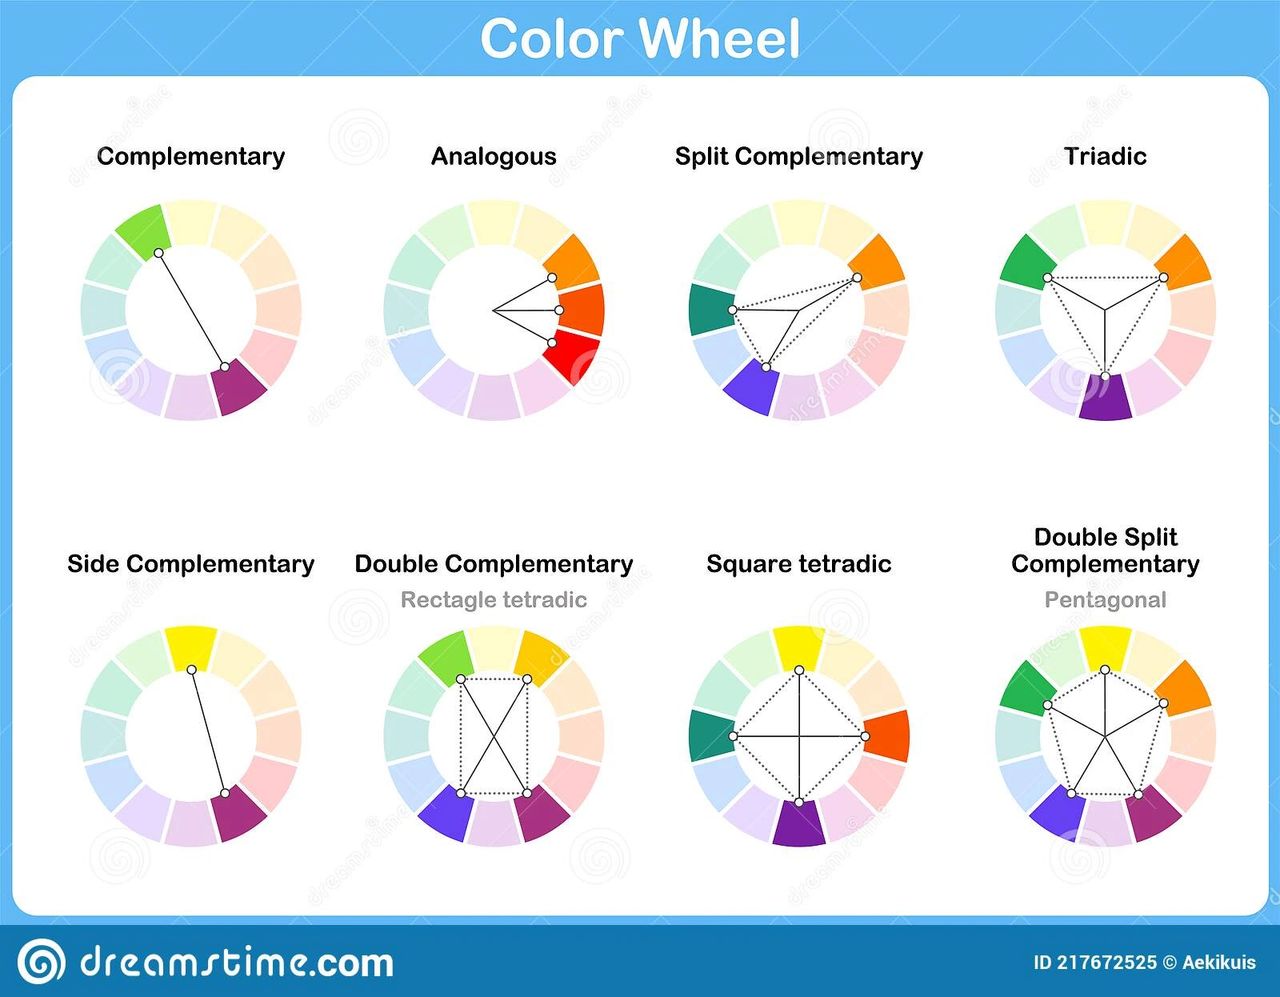 Hue, Tint, Tone and Shade. What's the difference? Color Wheel Artist  Secrets Revealed